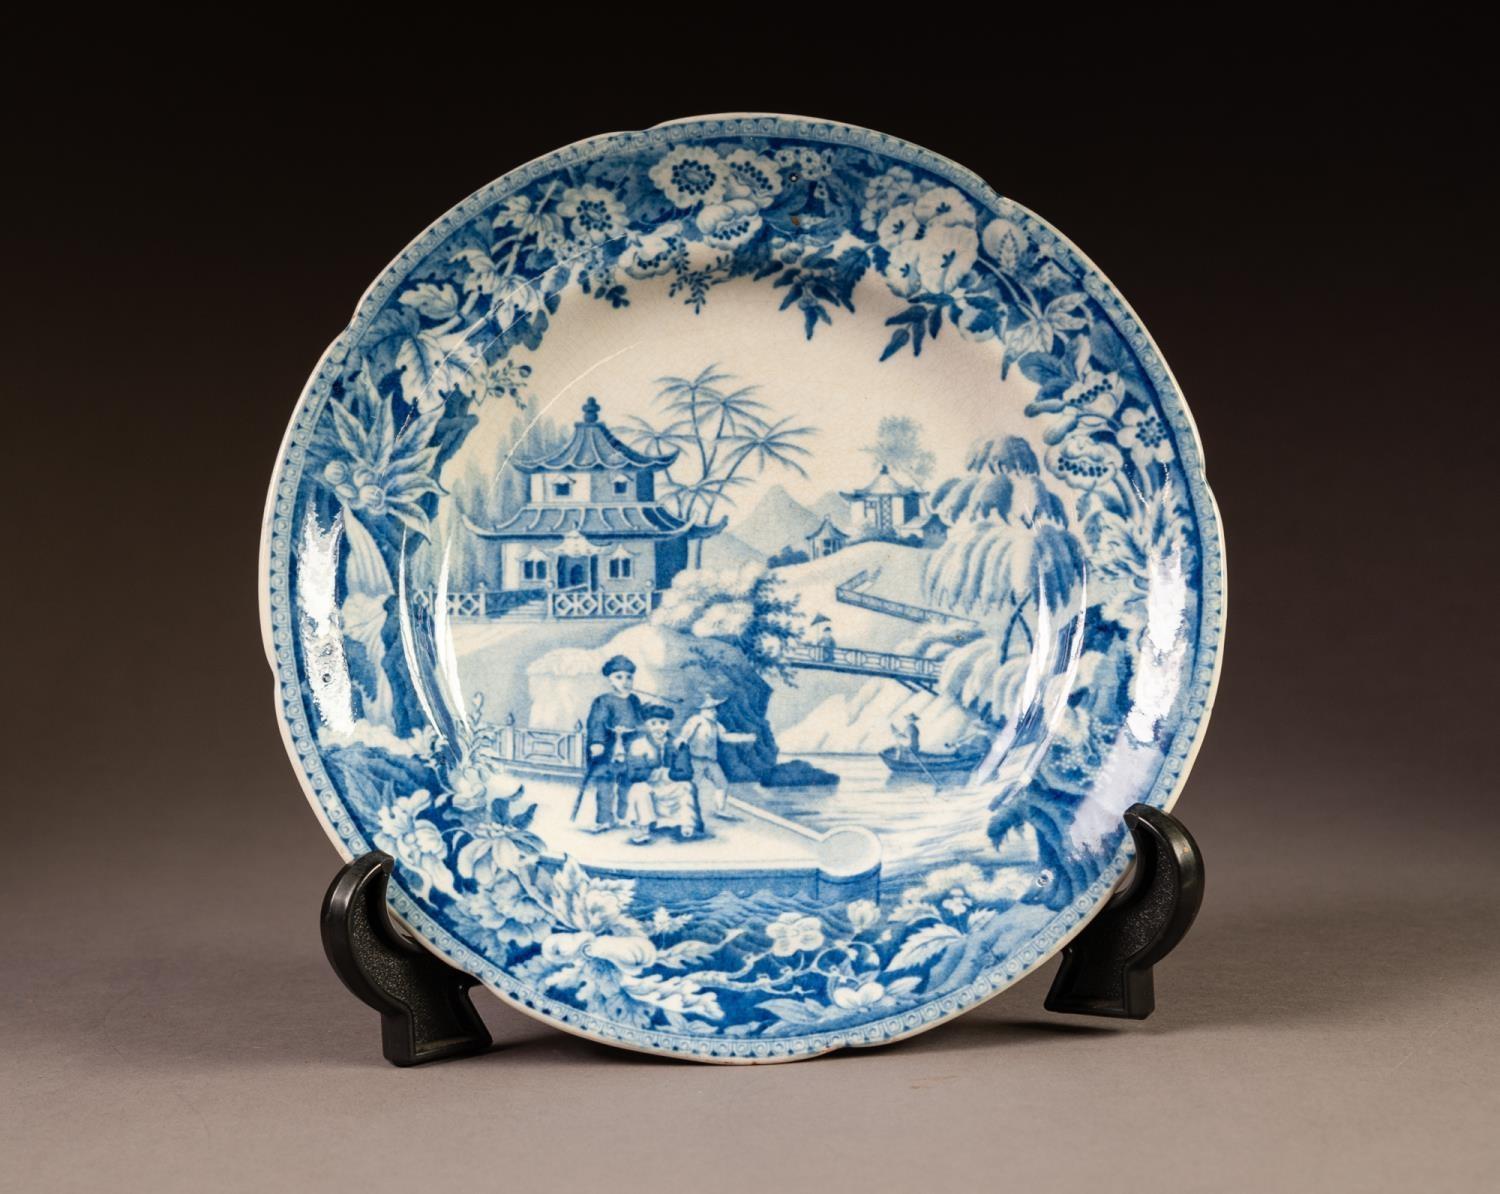 NINETEENTH CENTURY DAVENPORT BLUE AND WHITE POTTERY SIDE PLATE, printed in the Oriental taste with